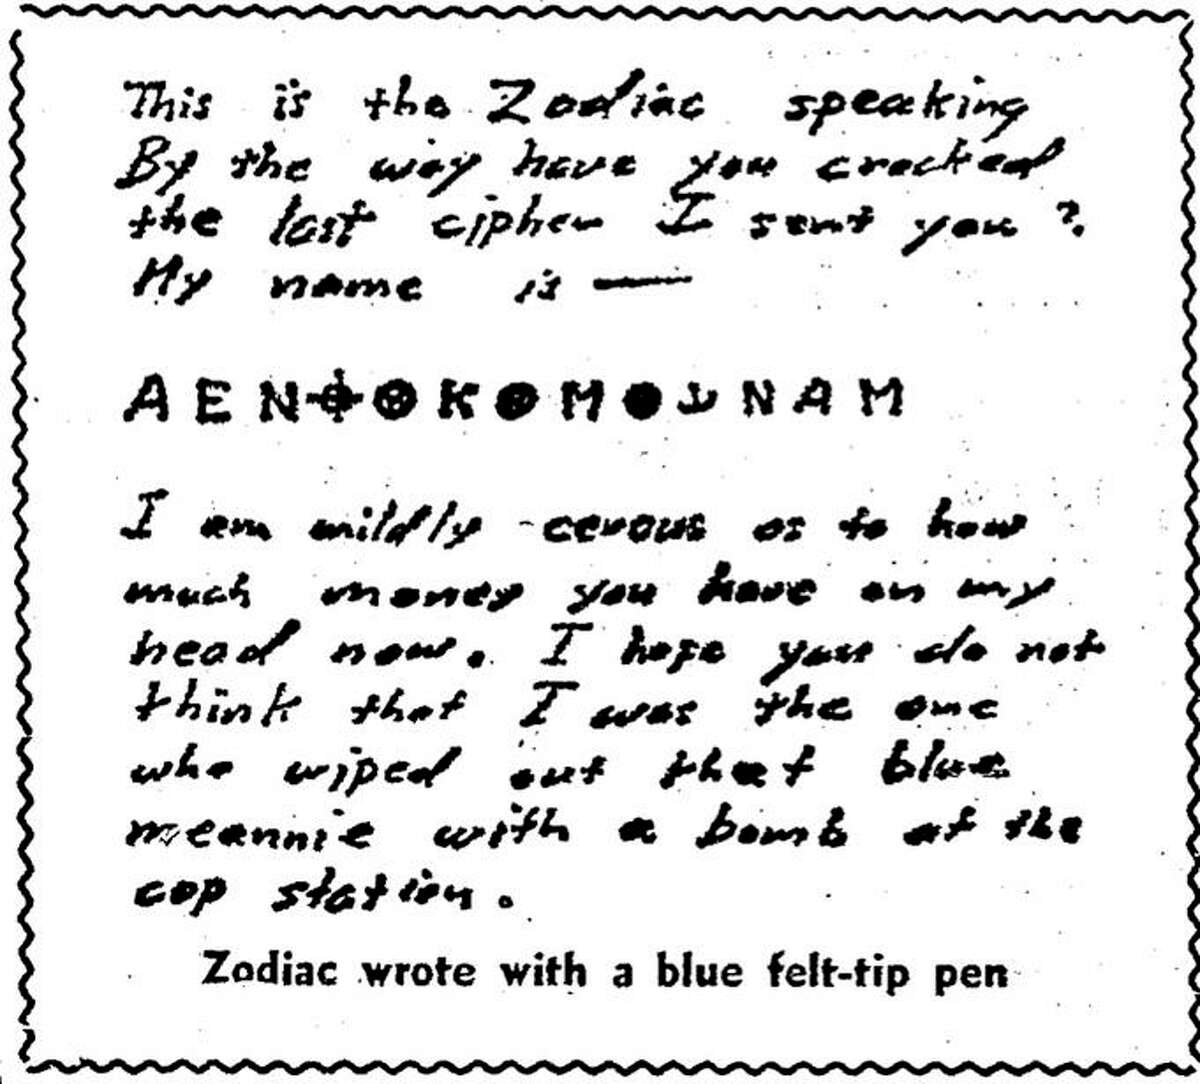 A letter published by The Chronicle on April 22, 1970, includes a cypher that the Zodiac hints will give away his identity.